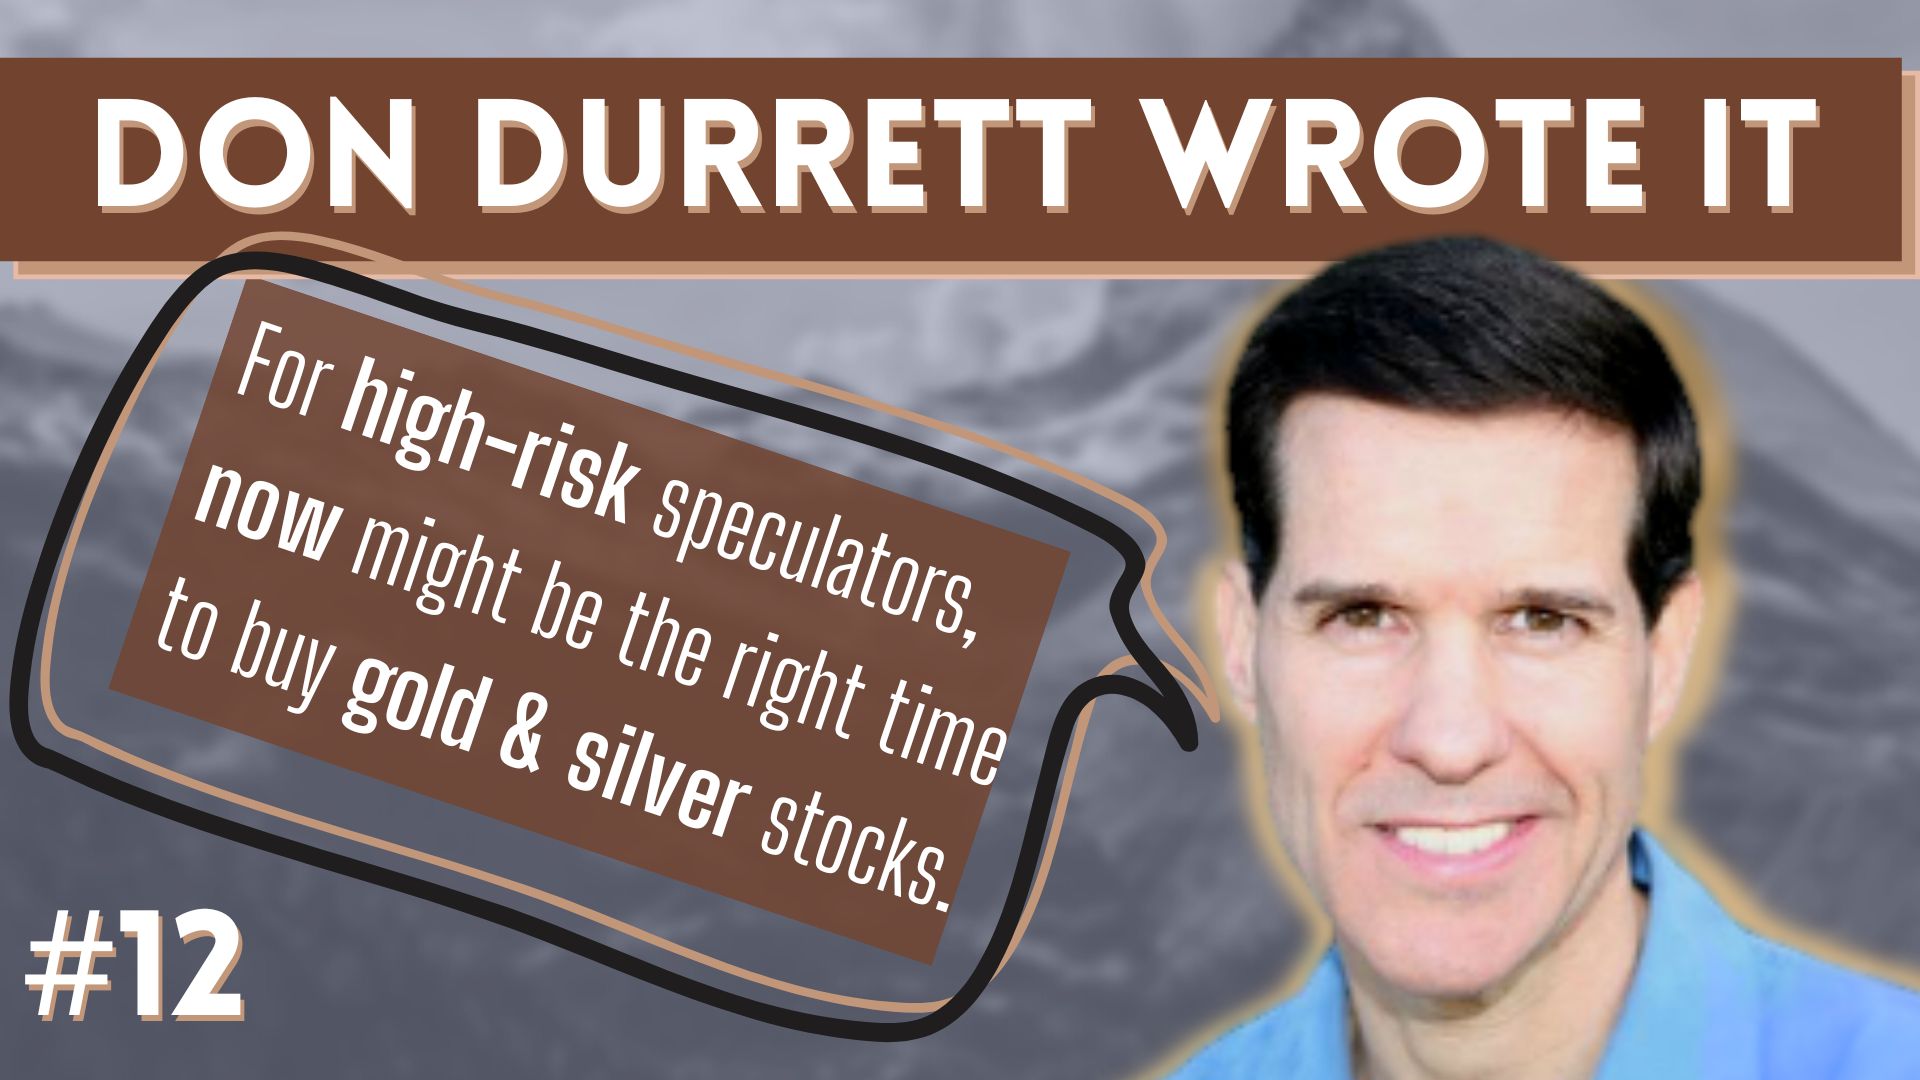 Don Durrett says it's time to buy gold & silver stocks